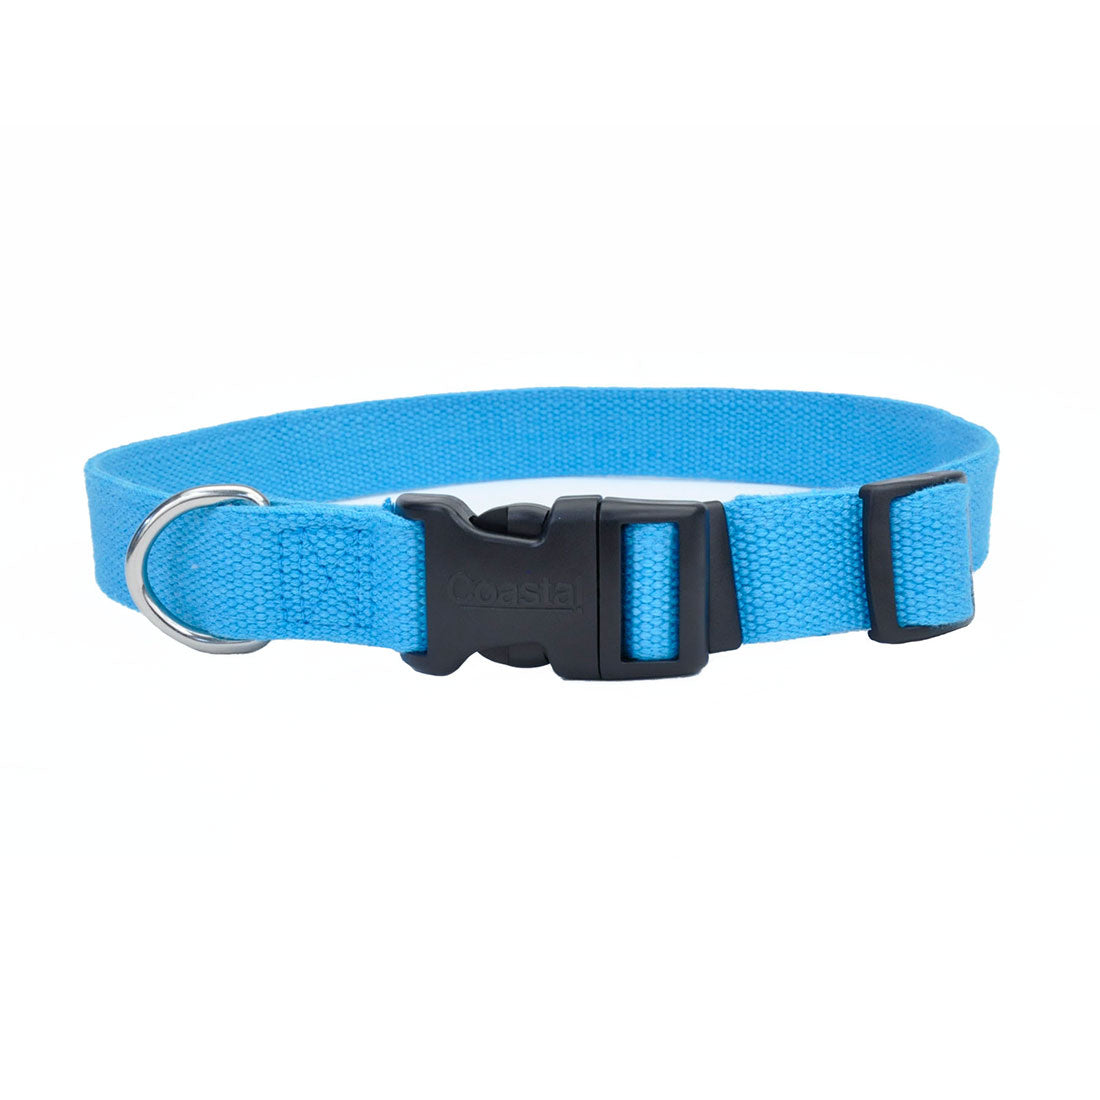 Coastal New Earth Soy Adjustable Large Dog Collar, Assorted Colors